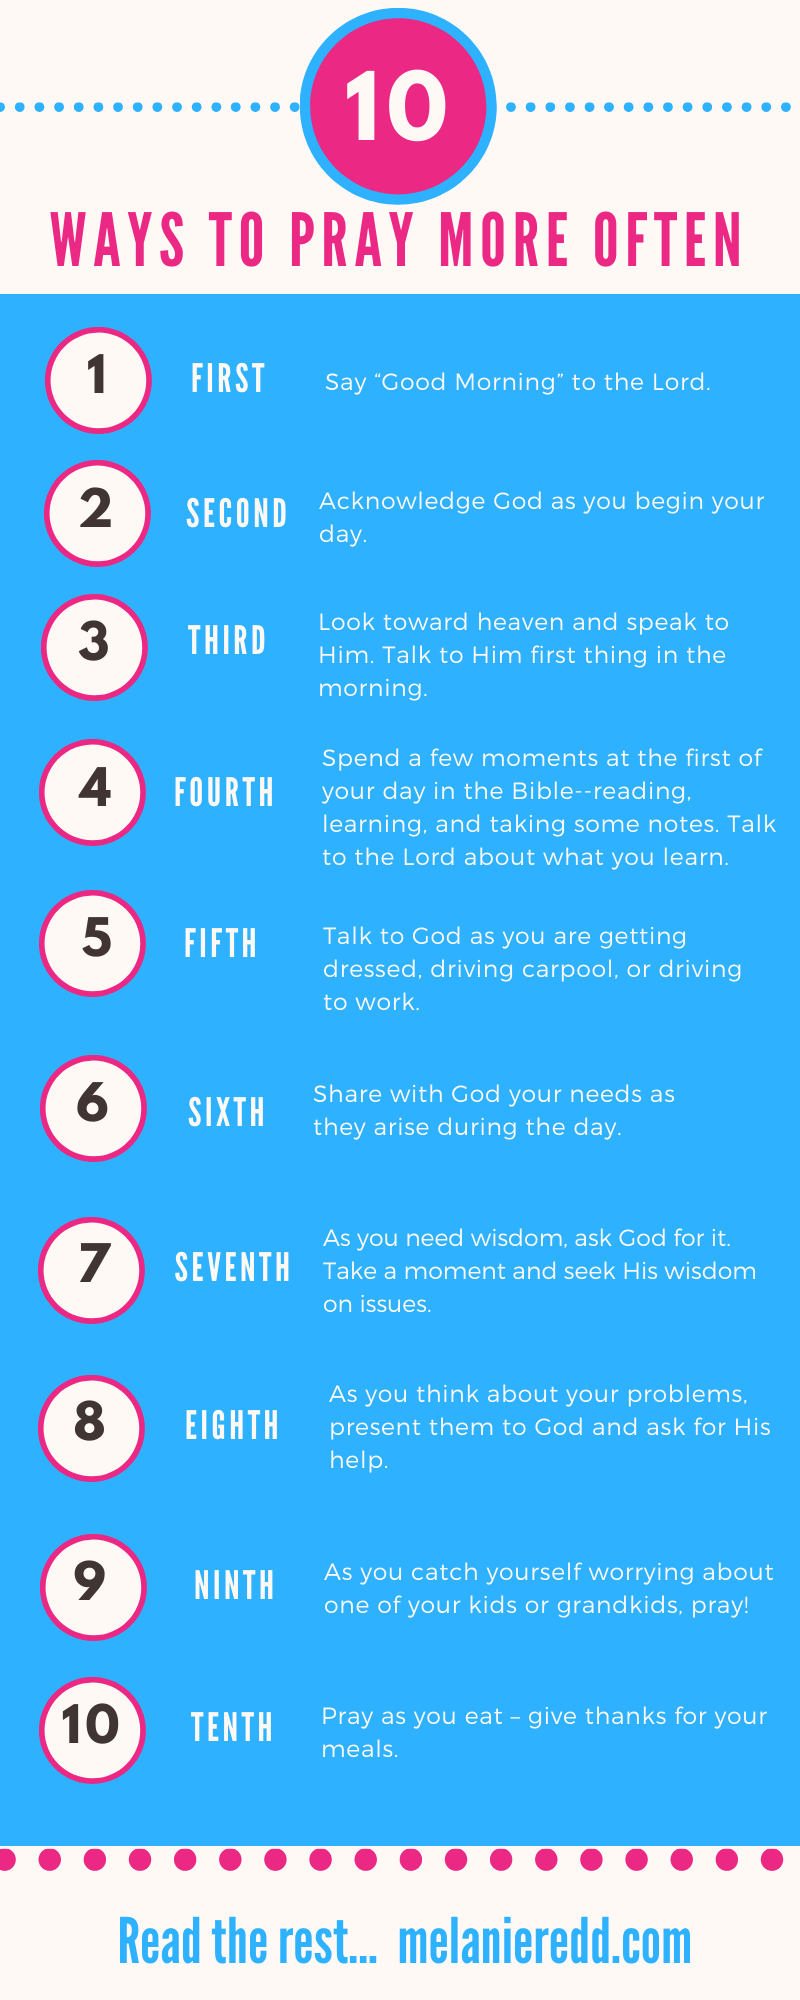 Prayer. It's something we all would like to do and do well. But, what happens when we really don't know how to pray? What do we do when we are uncomfortable or awkward with our prayers? How can we get better at praying? Here are simple, helpful, and practical tips on how to pray. Why not drop by to read them? #pray #prayer #easypraying #learningtopray